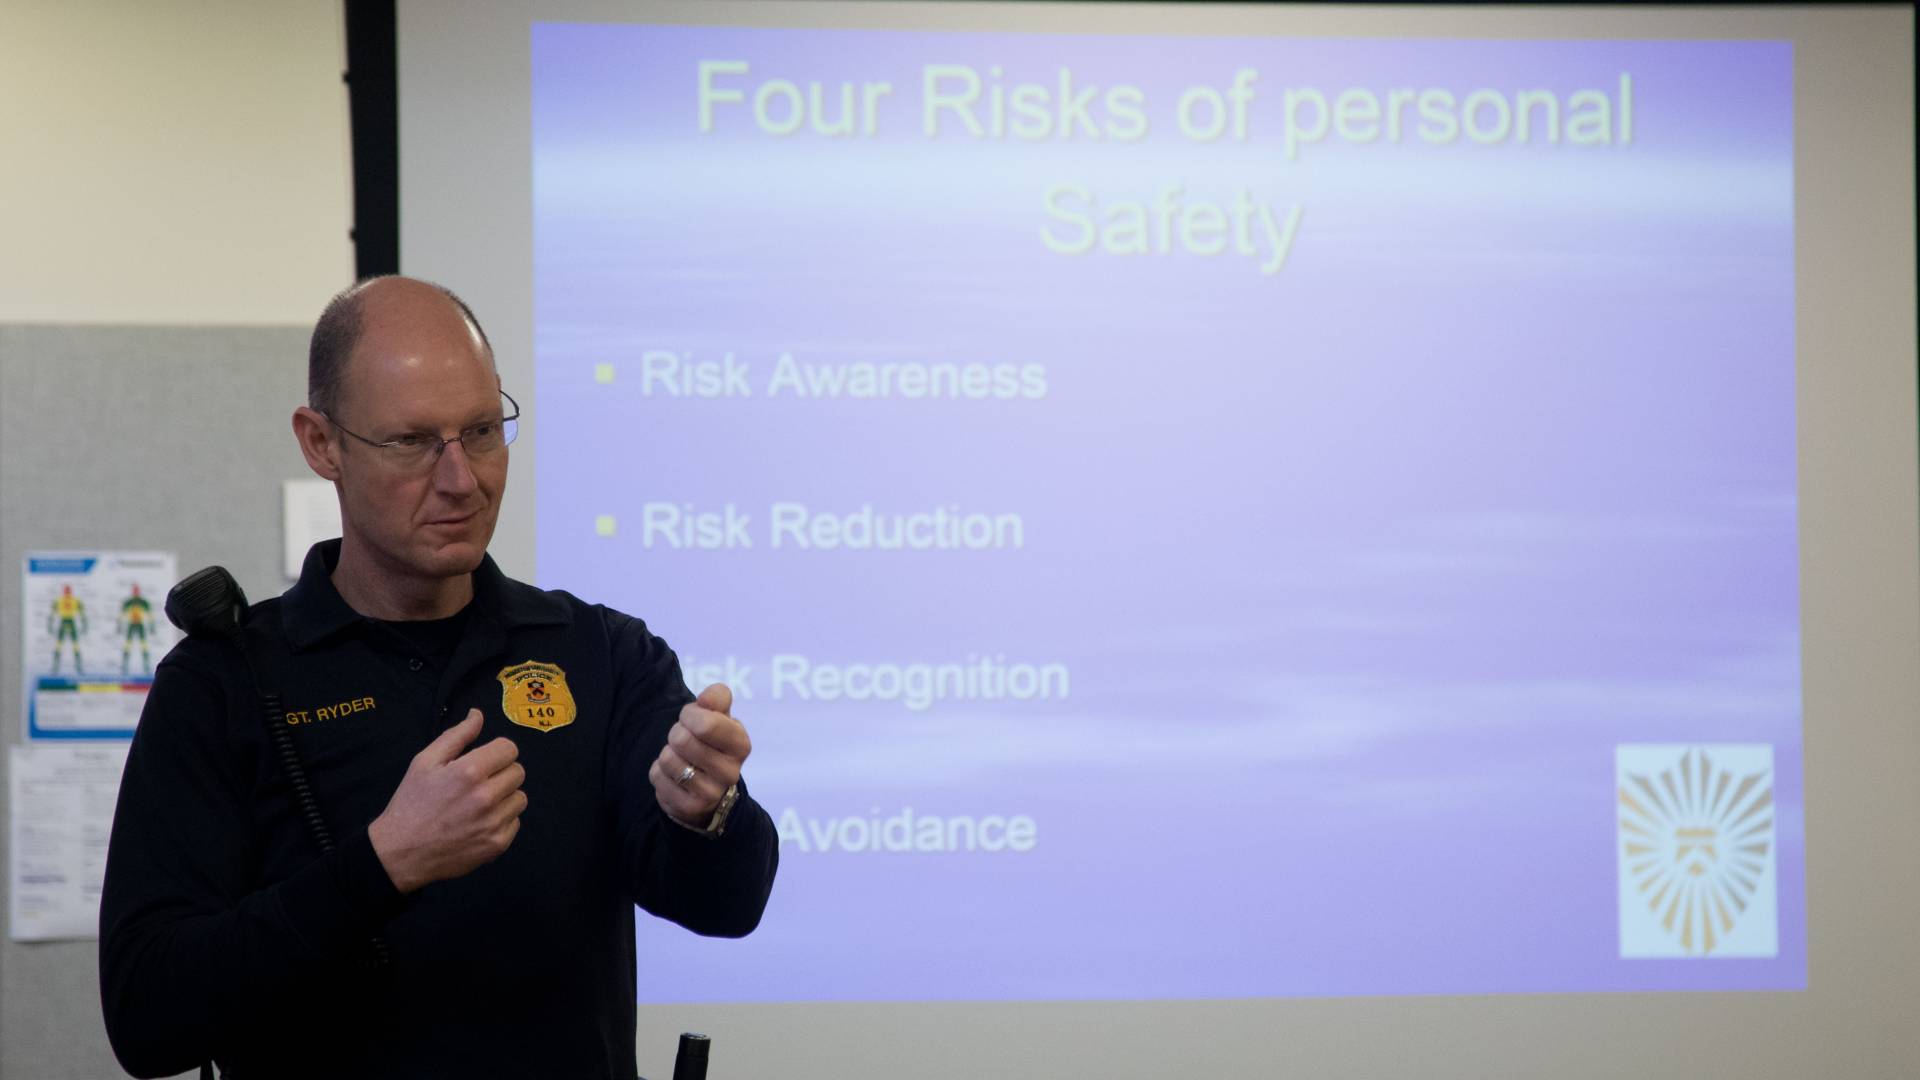 Public Safety officer Sean Ryder teaching safety course; Text on Slide: Four Risks of Personal Safety; Risk Awareness; Risk Reduction; Risk Recognition; Risk Avoidance